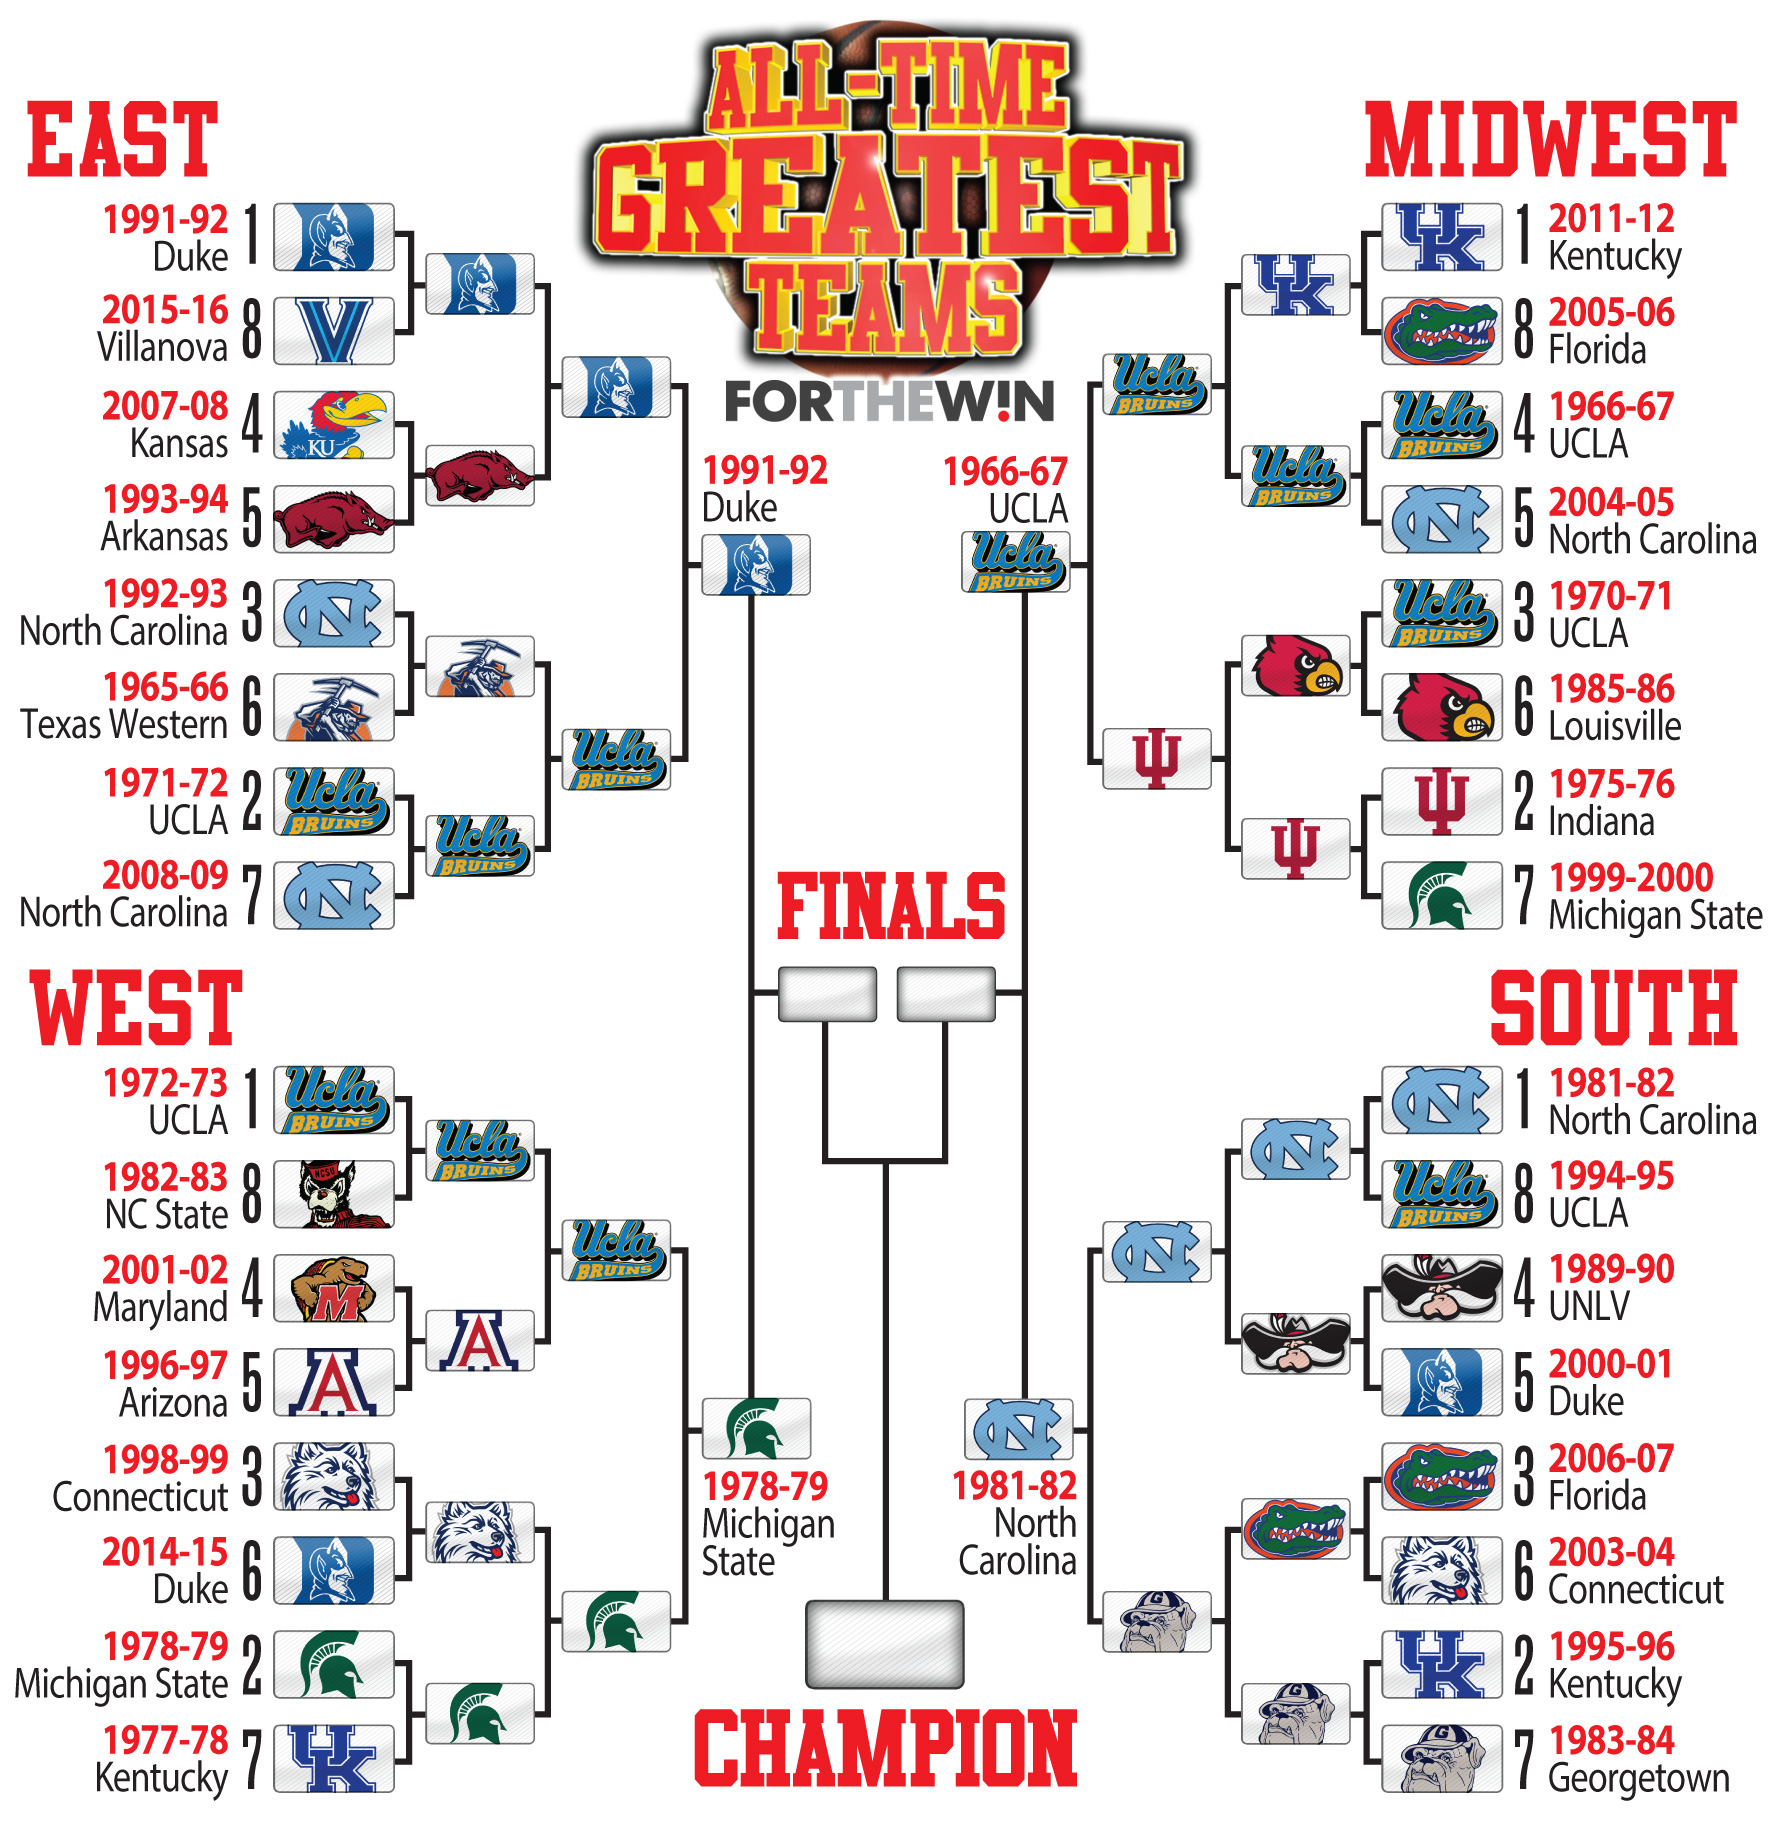 Bracket Madness The greatest NCAA tournament team of alltime Final